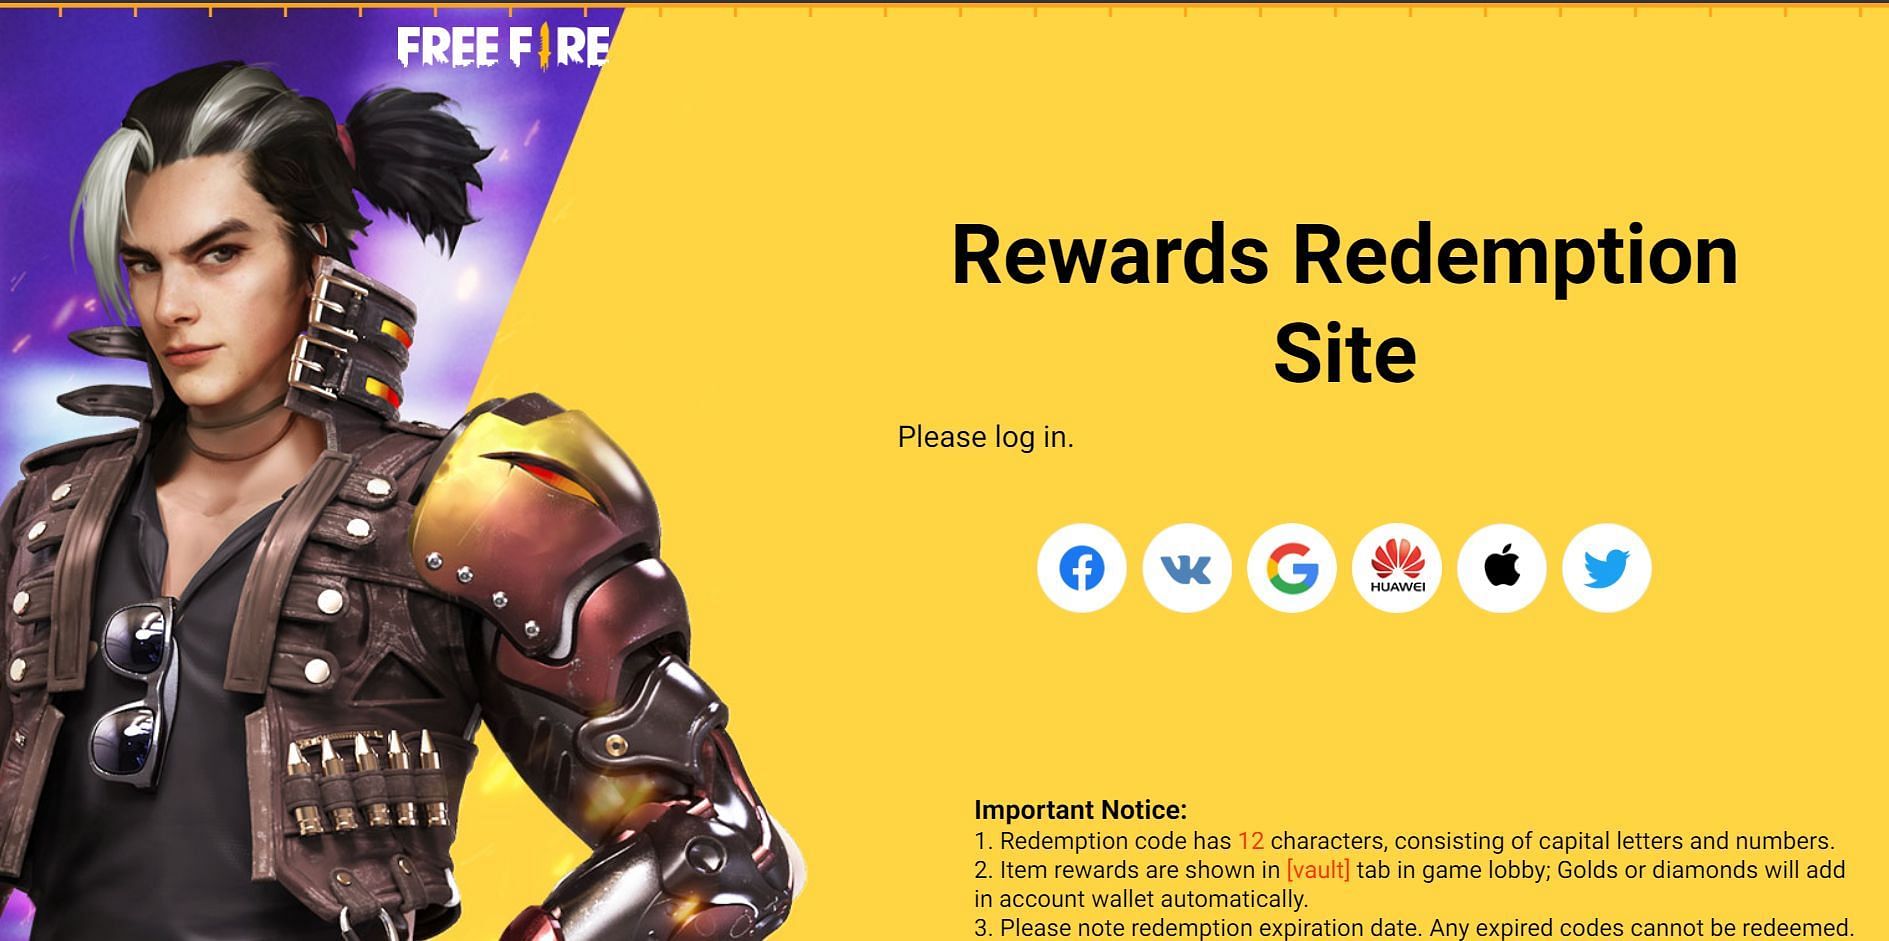 Redeem codes can provide diamonds or other free rewards to players (Image via Free Fire)